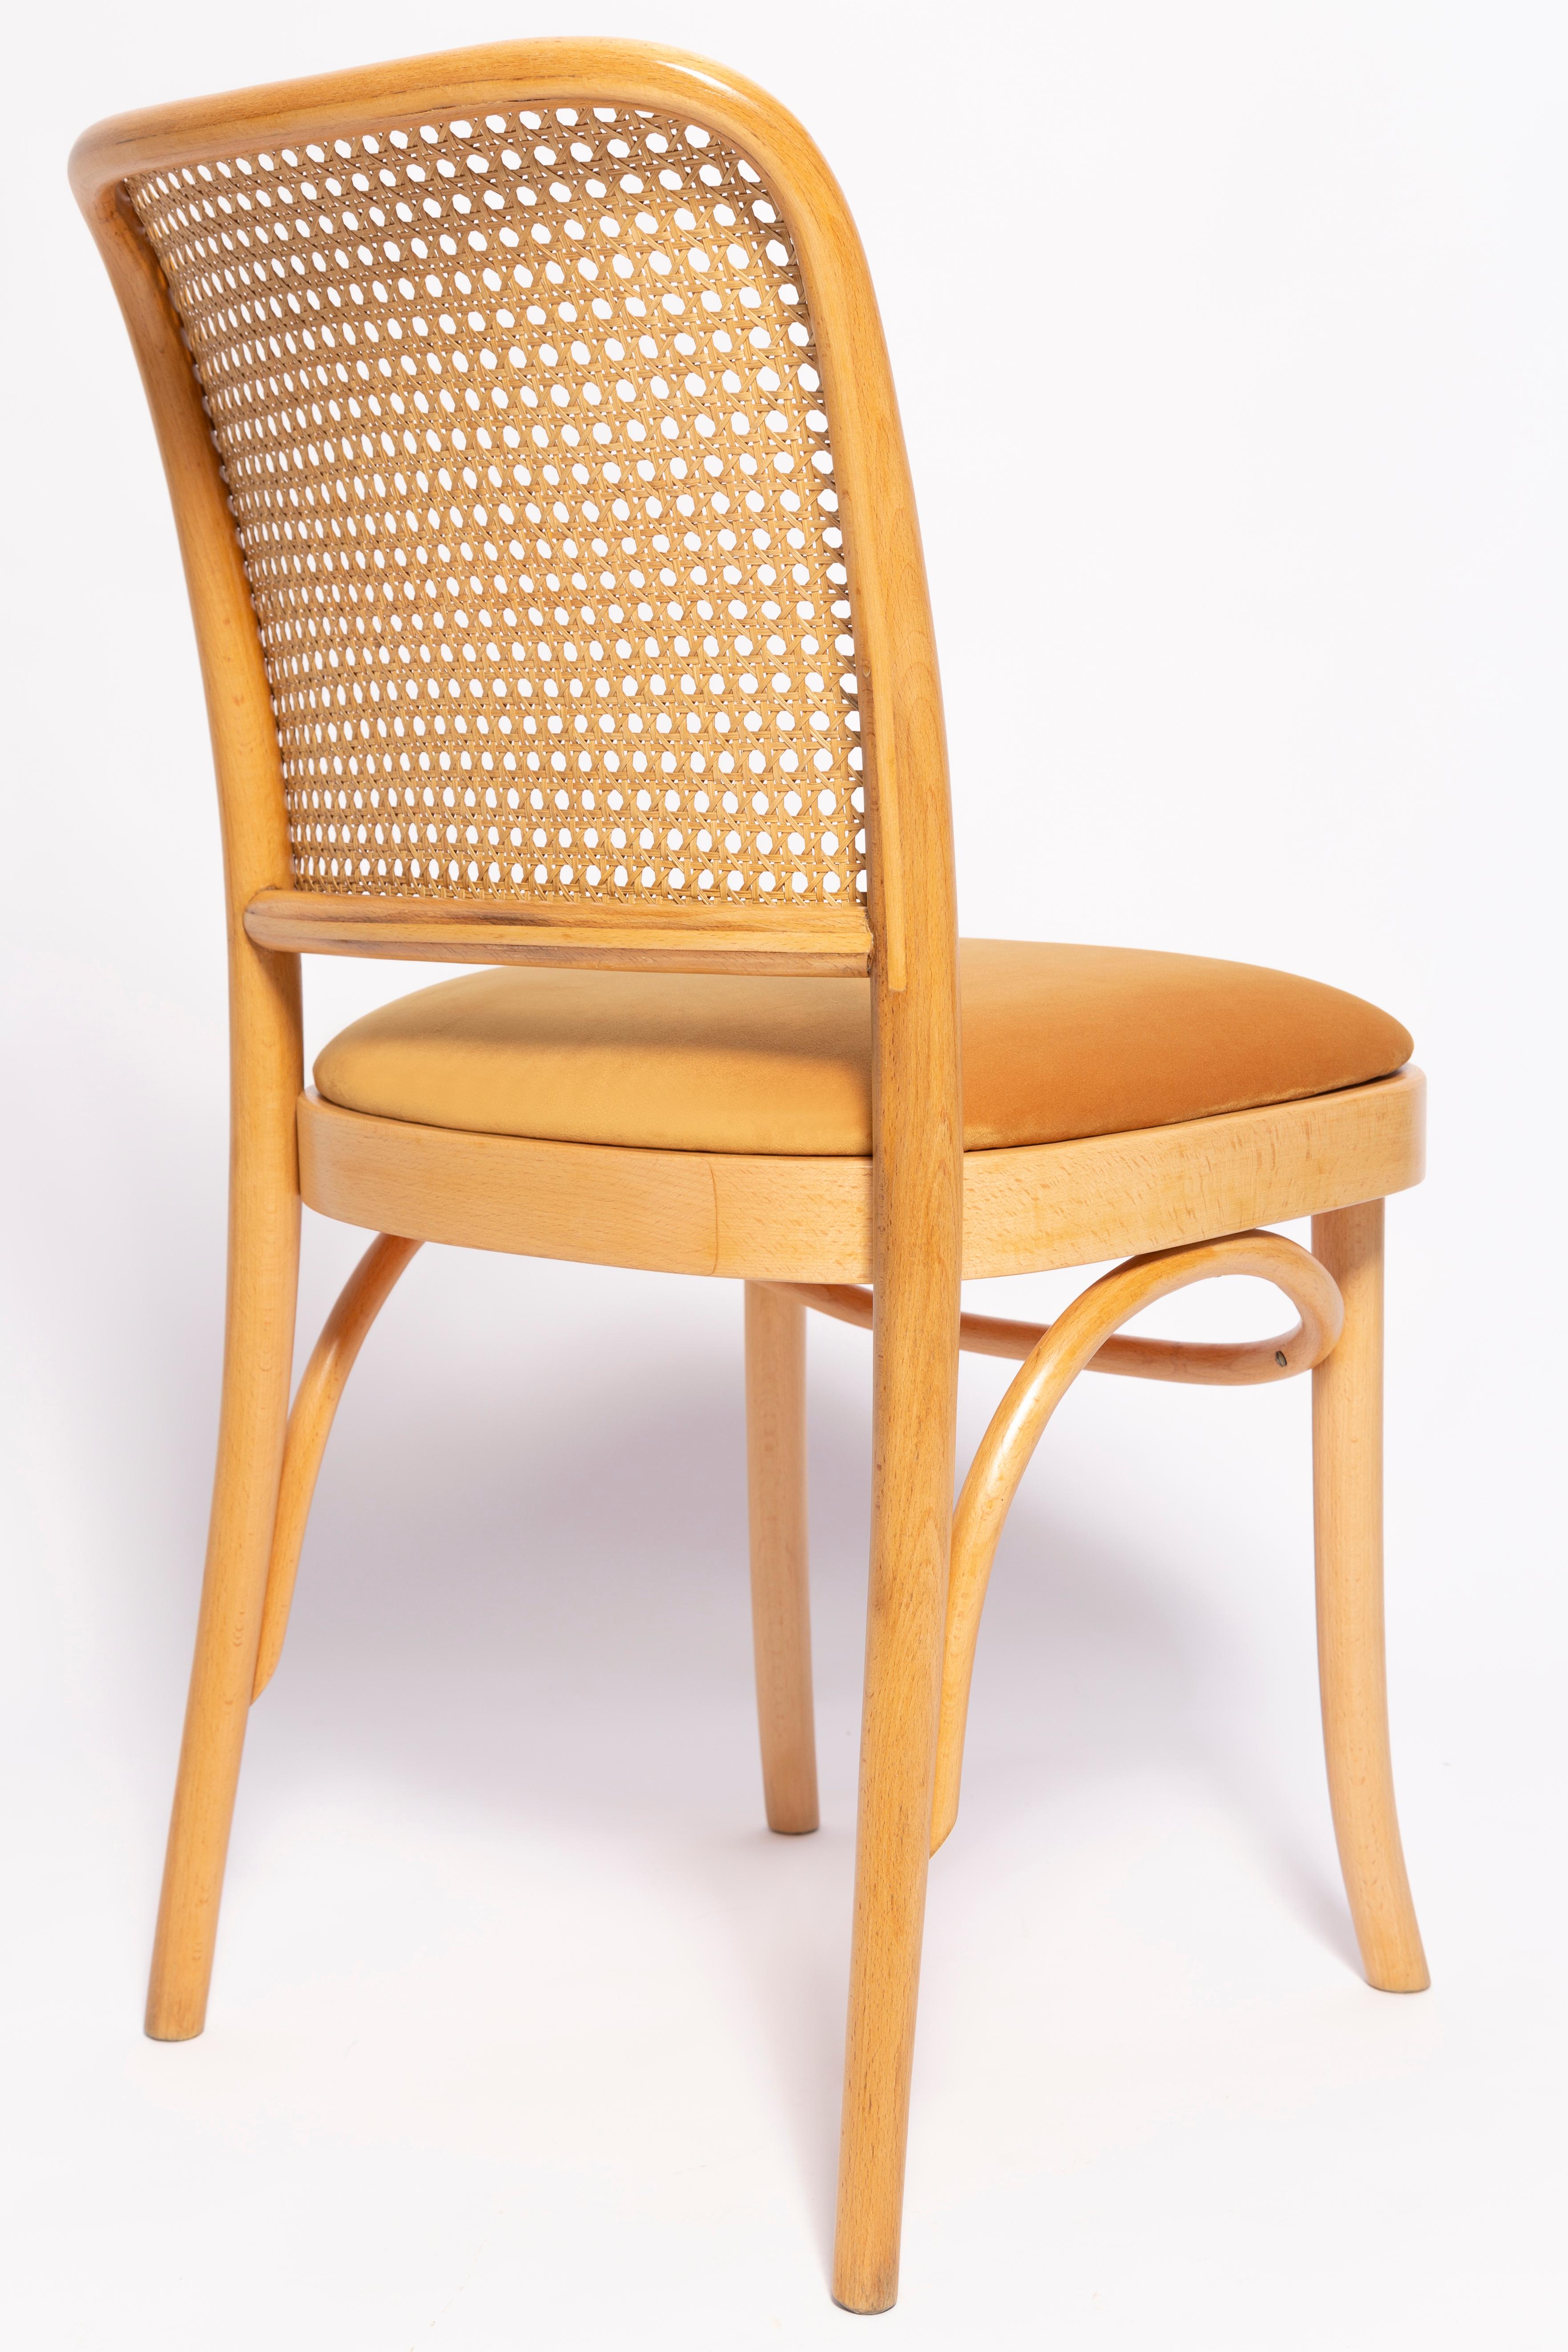 Set of Six Mid Century Yellow Velvet Thonet Wood Rattan Chairs, Europe, 1960s For Sale 4